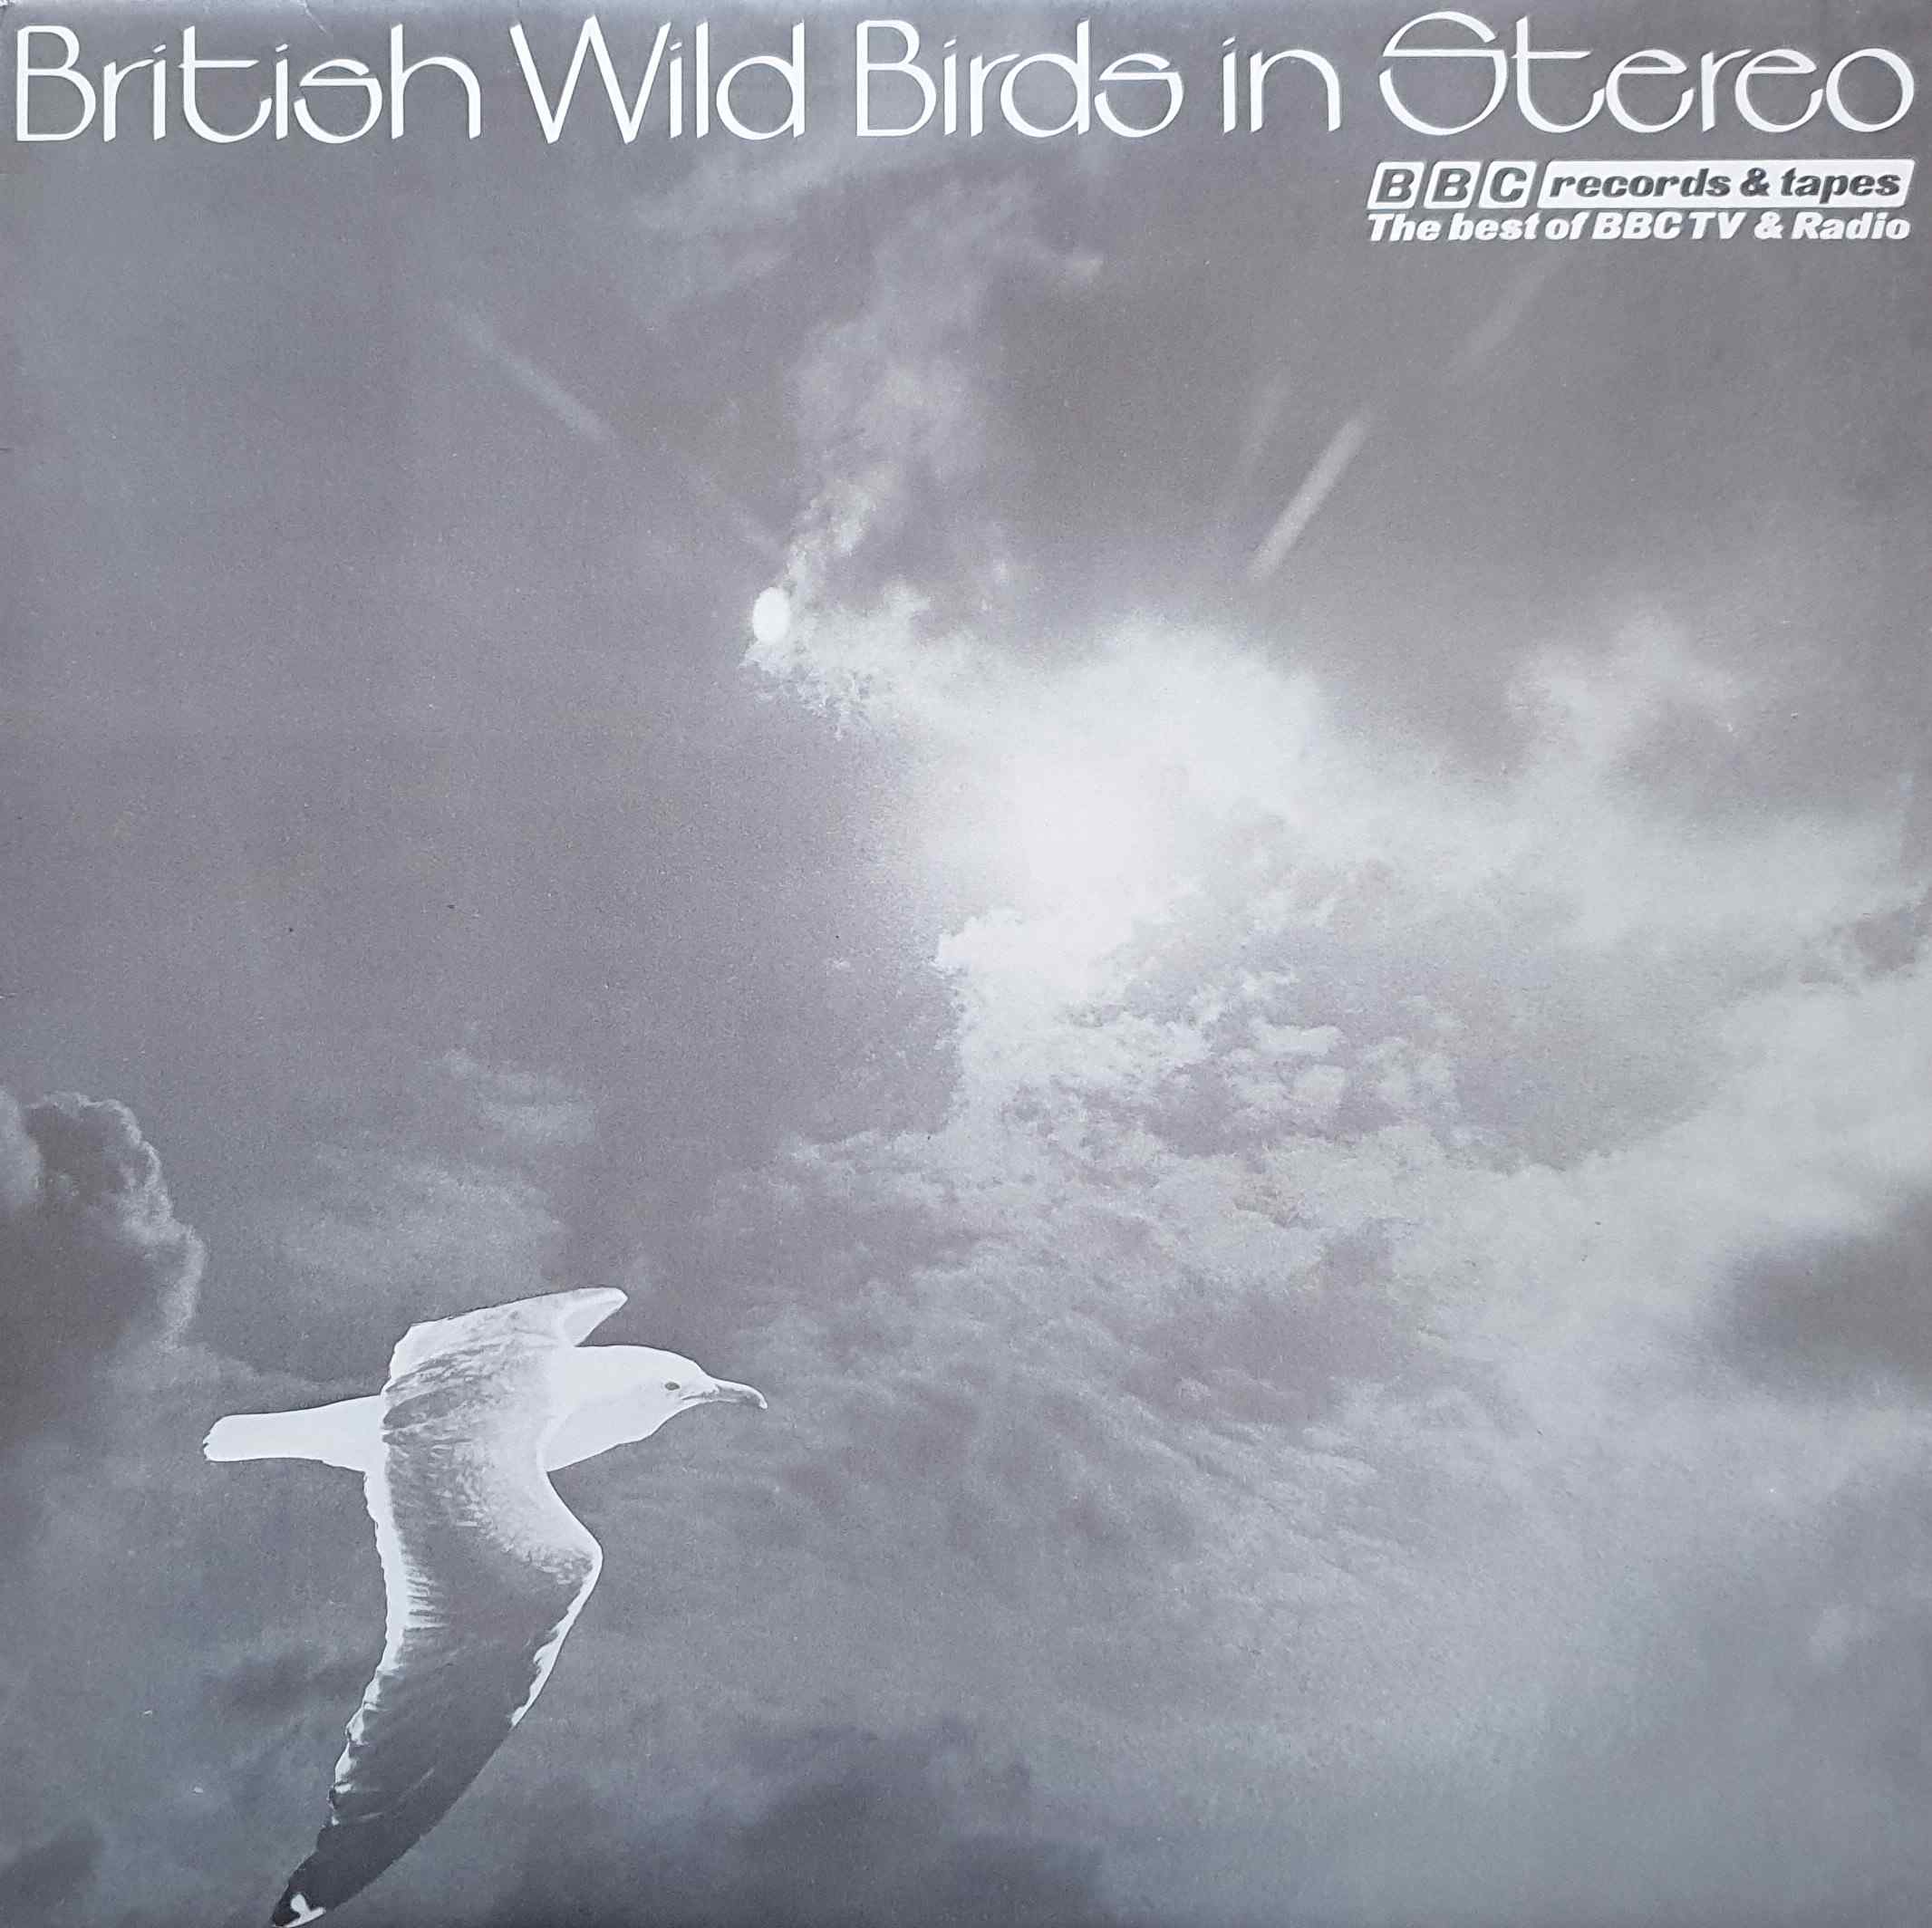 Picture of REC 197 British wild birds in stereo by artist John F. Burton / David J. Tombs from the BBC albums - Records and Tapes library